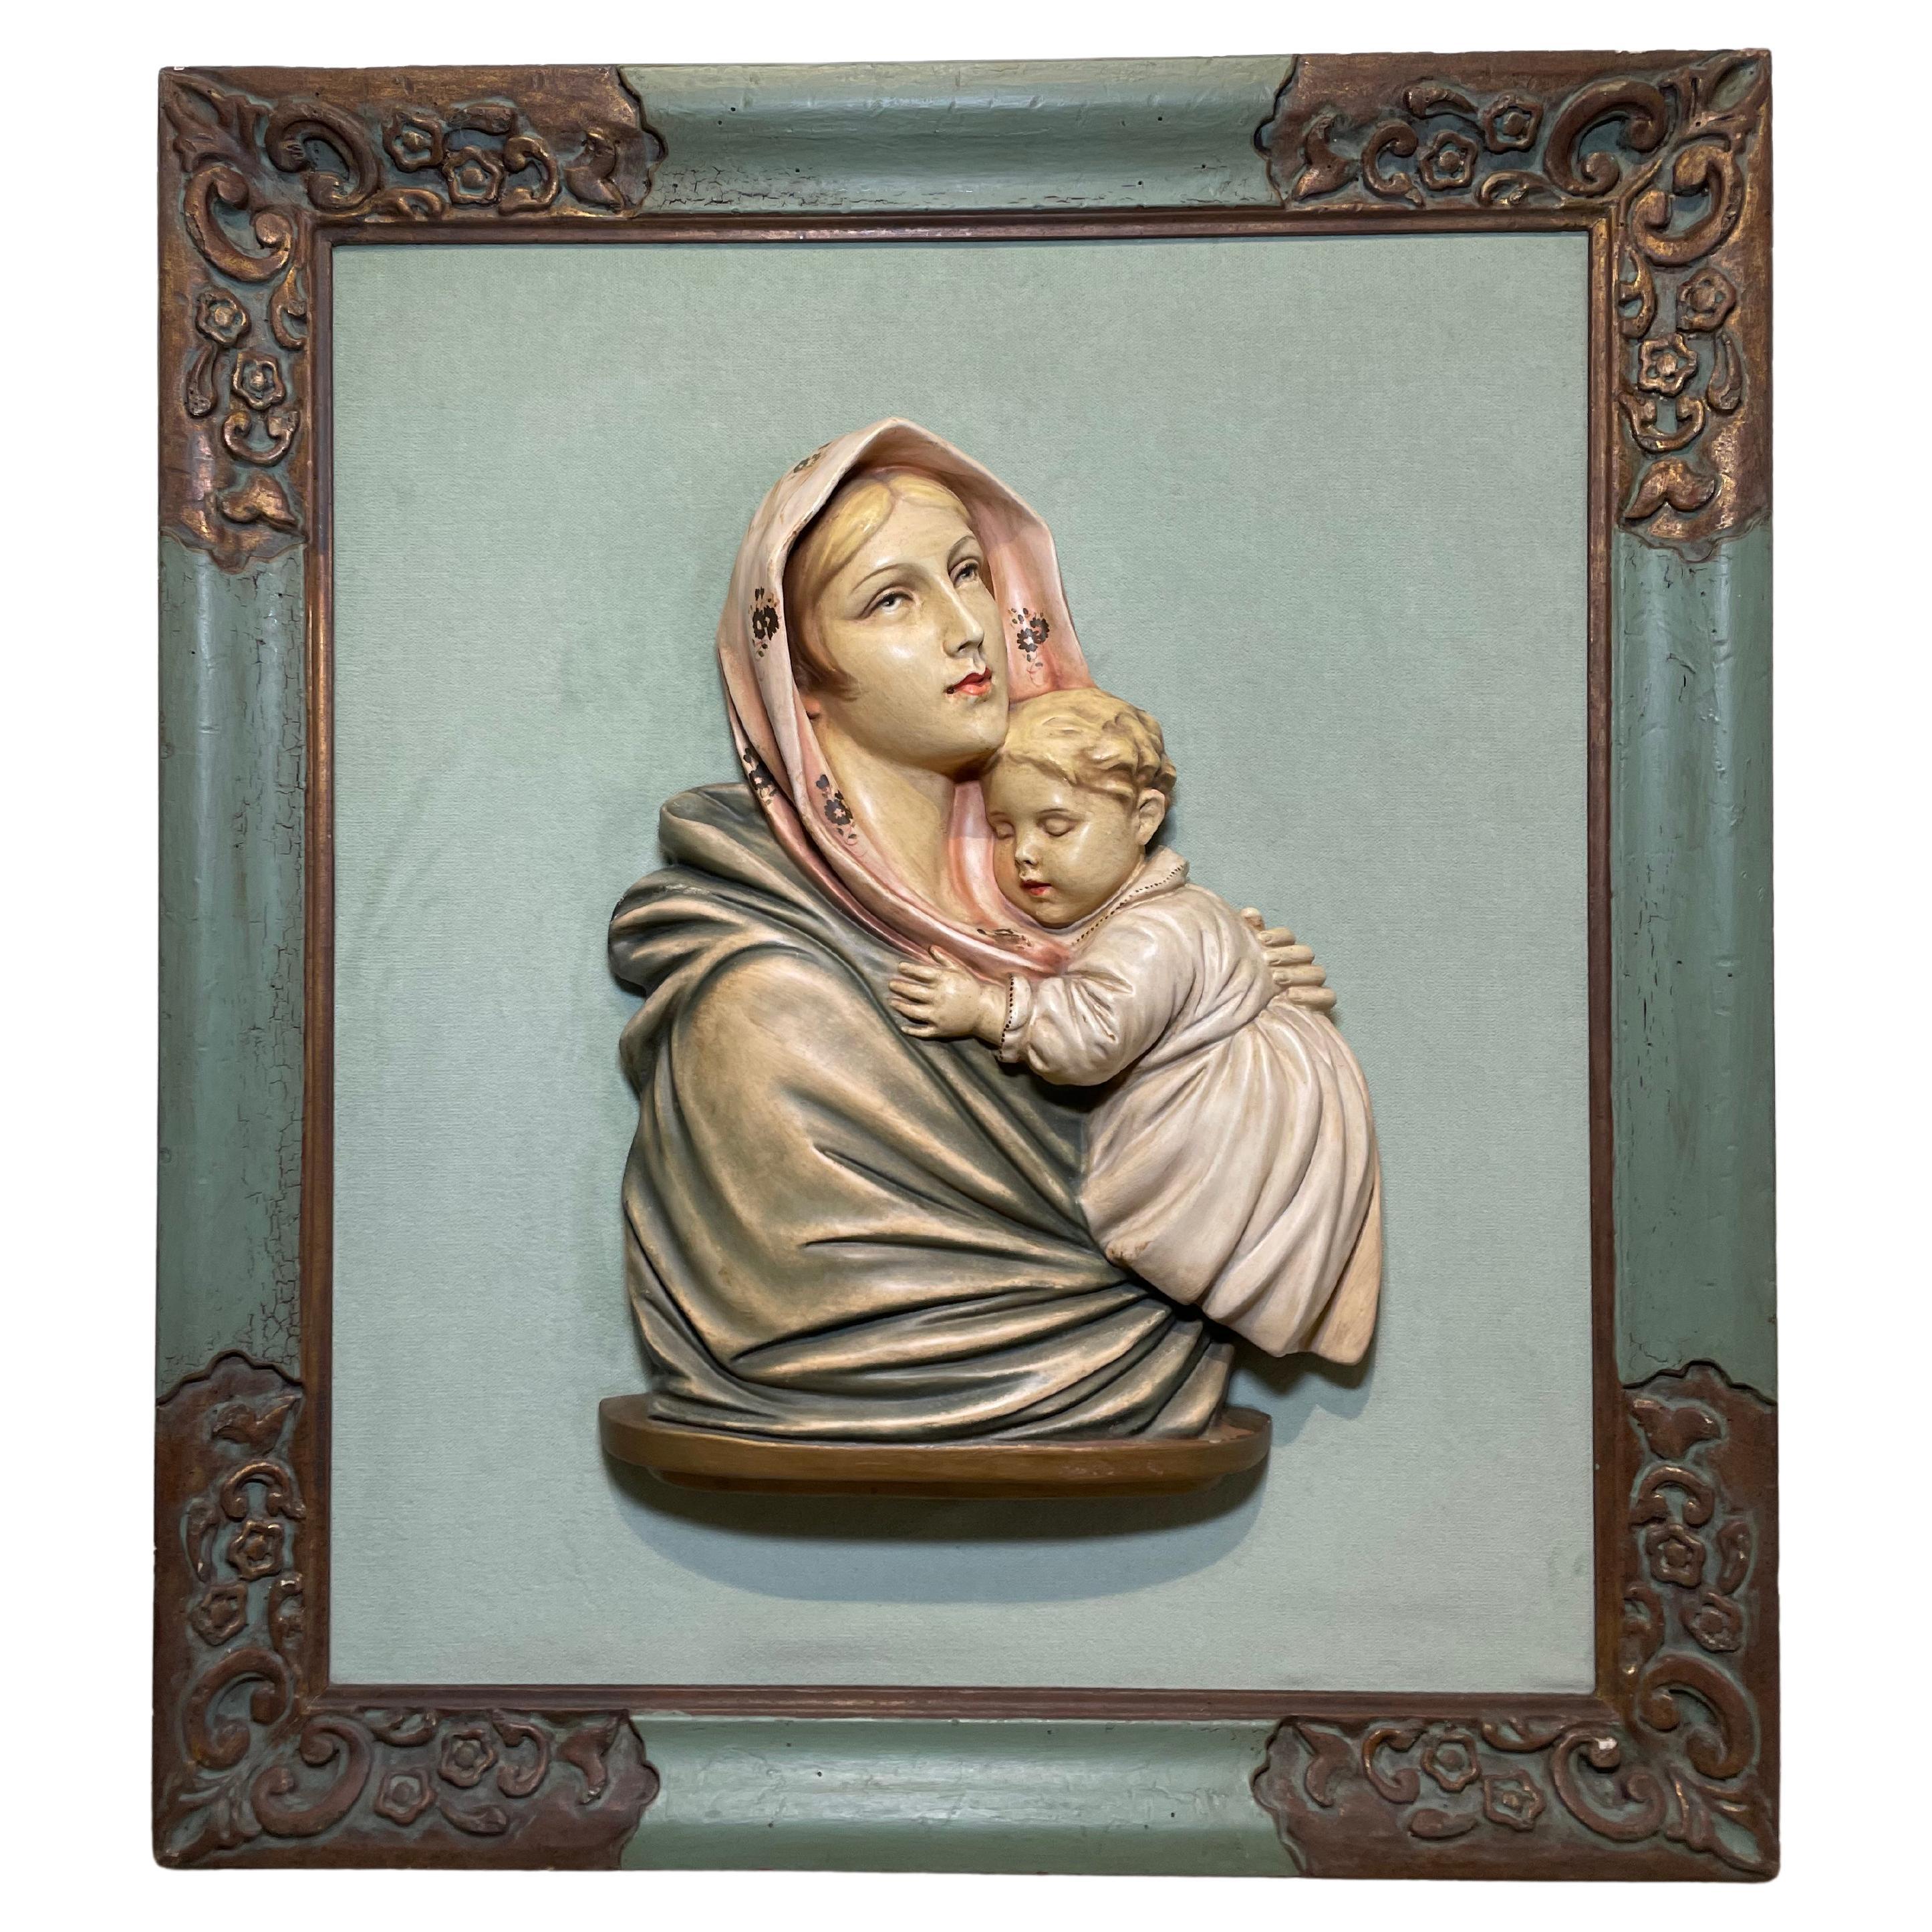 Virgin Mary and Baby Jesus Ceramic Sculpture/Relief Frame